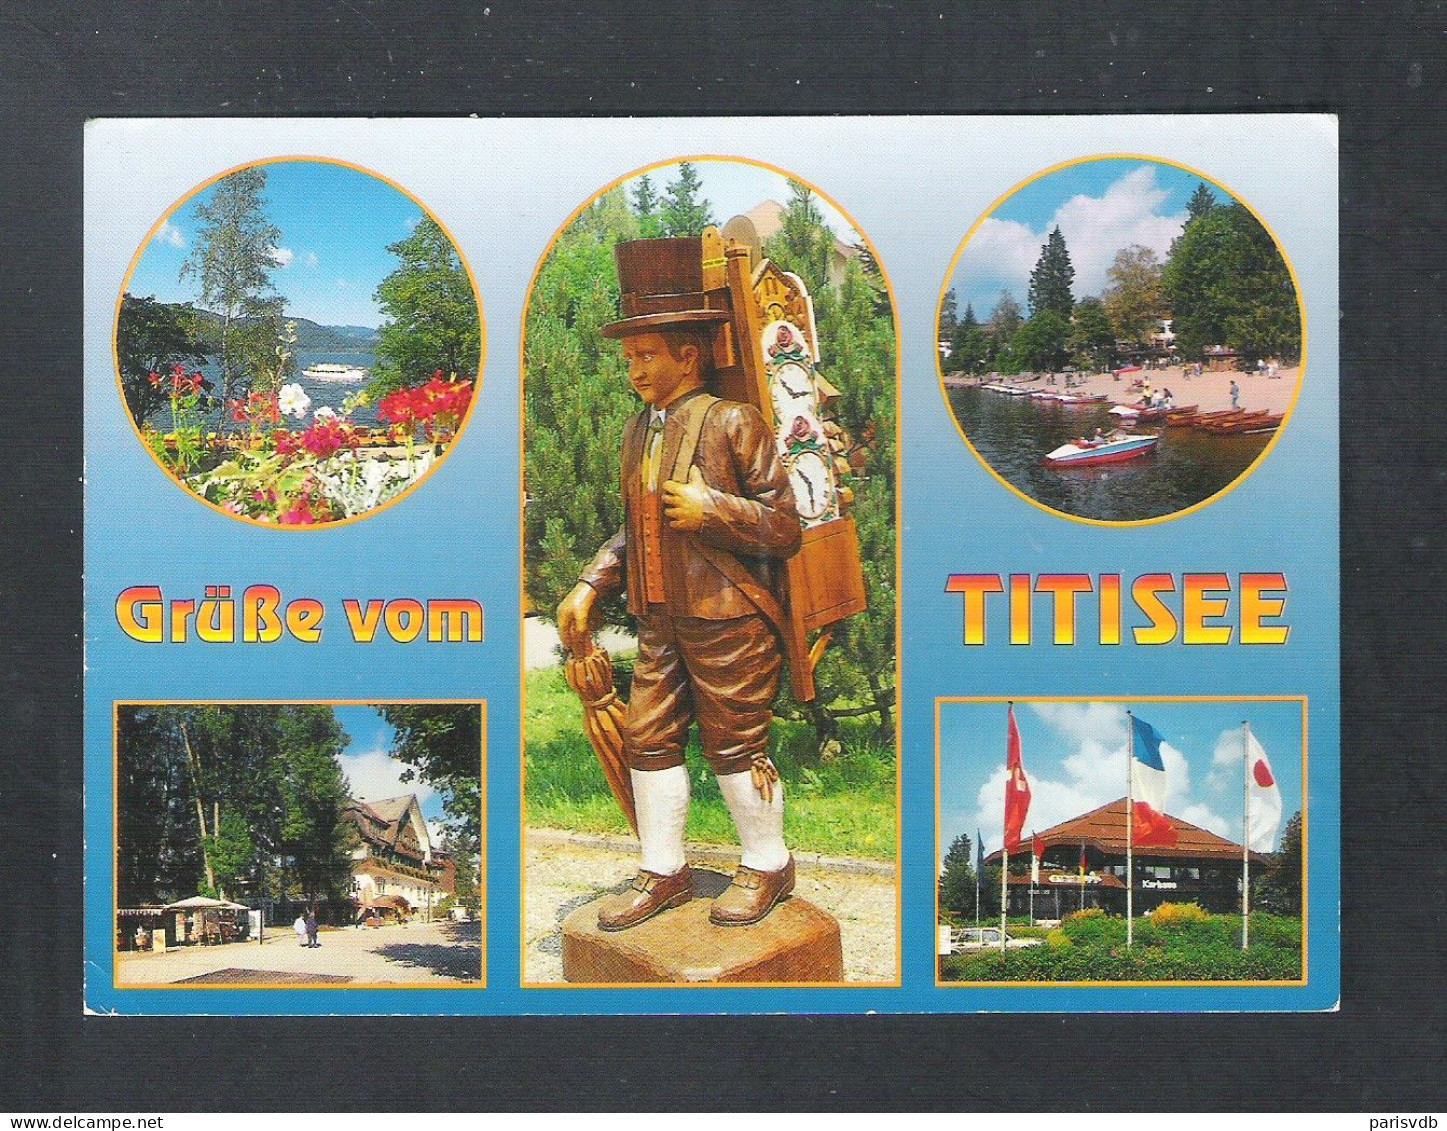 TITISEE - GRUSSE VOM TITISEE  (D 196) - Titisee-Neustadt